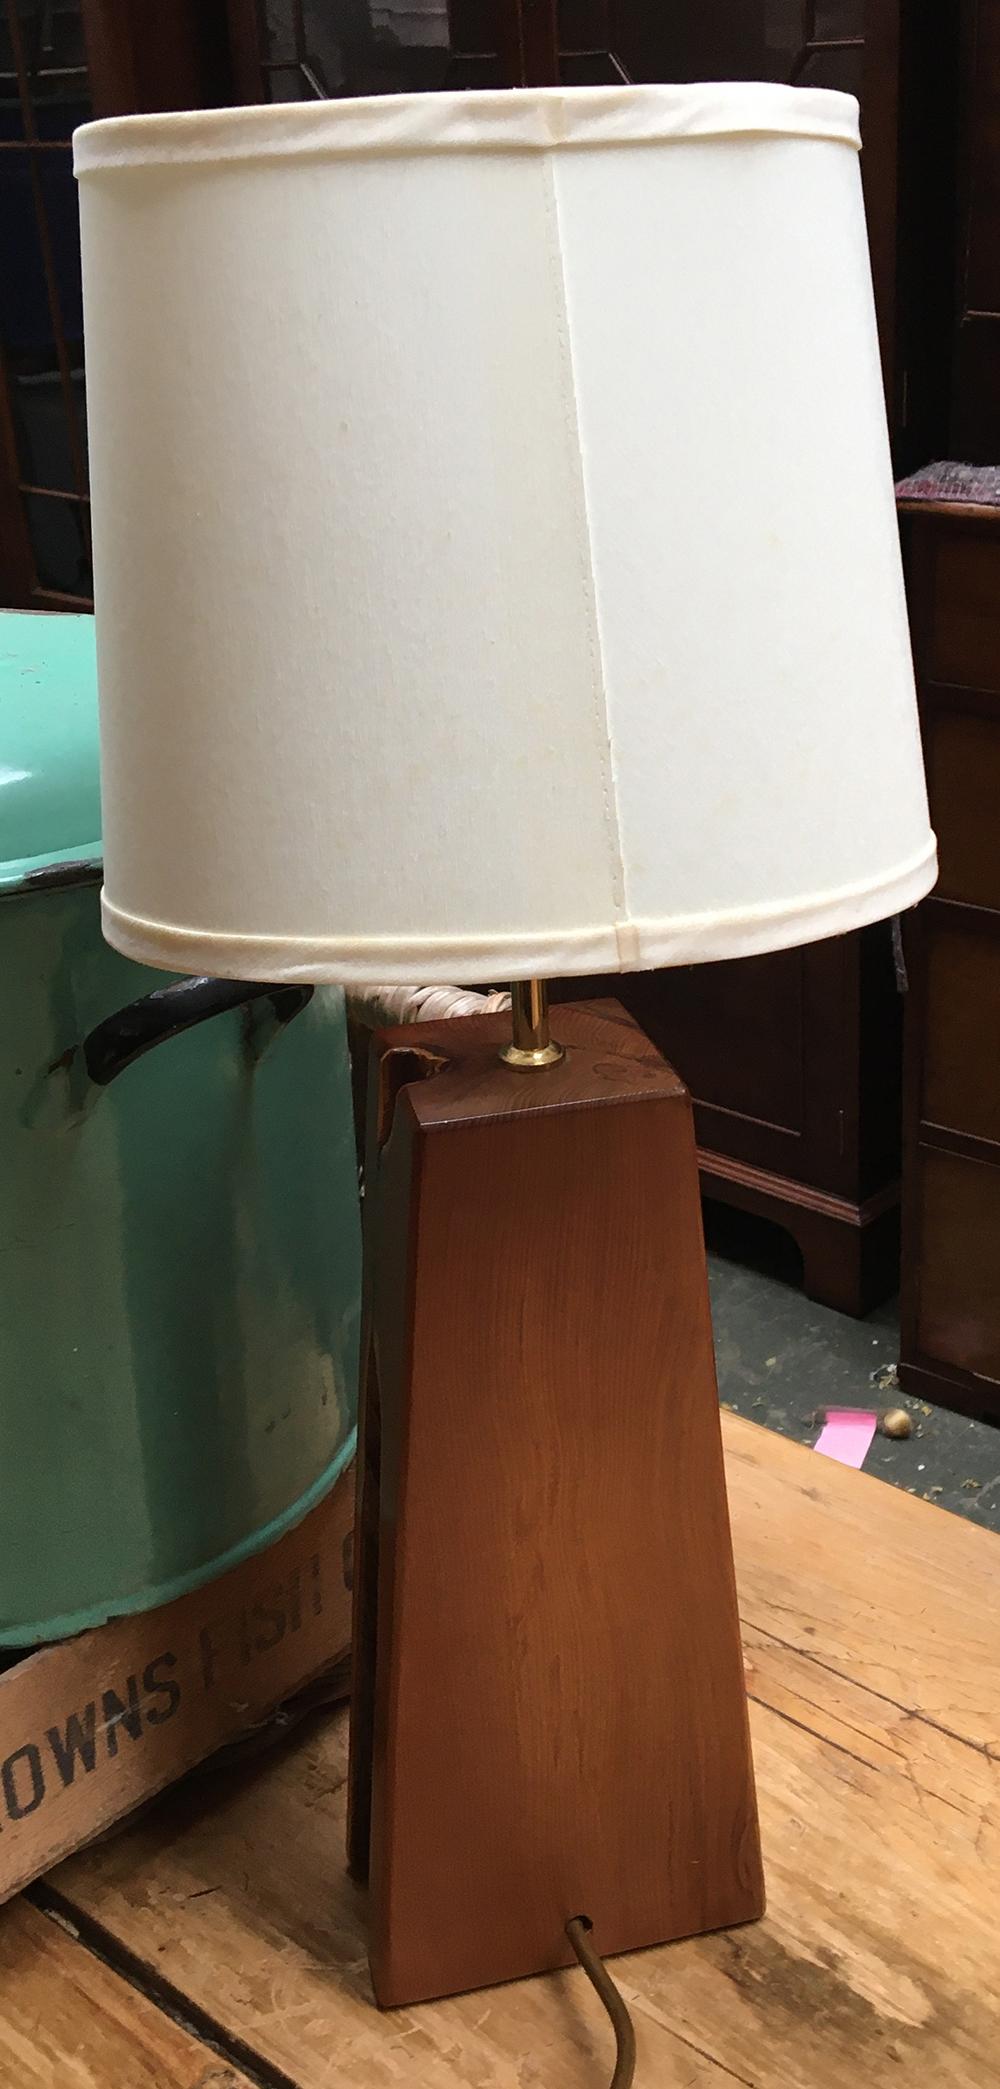 A wooden table lamp with shade, 53cmH